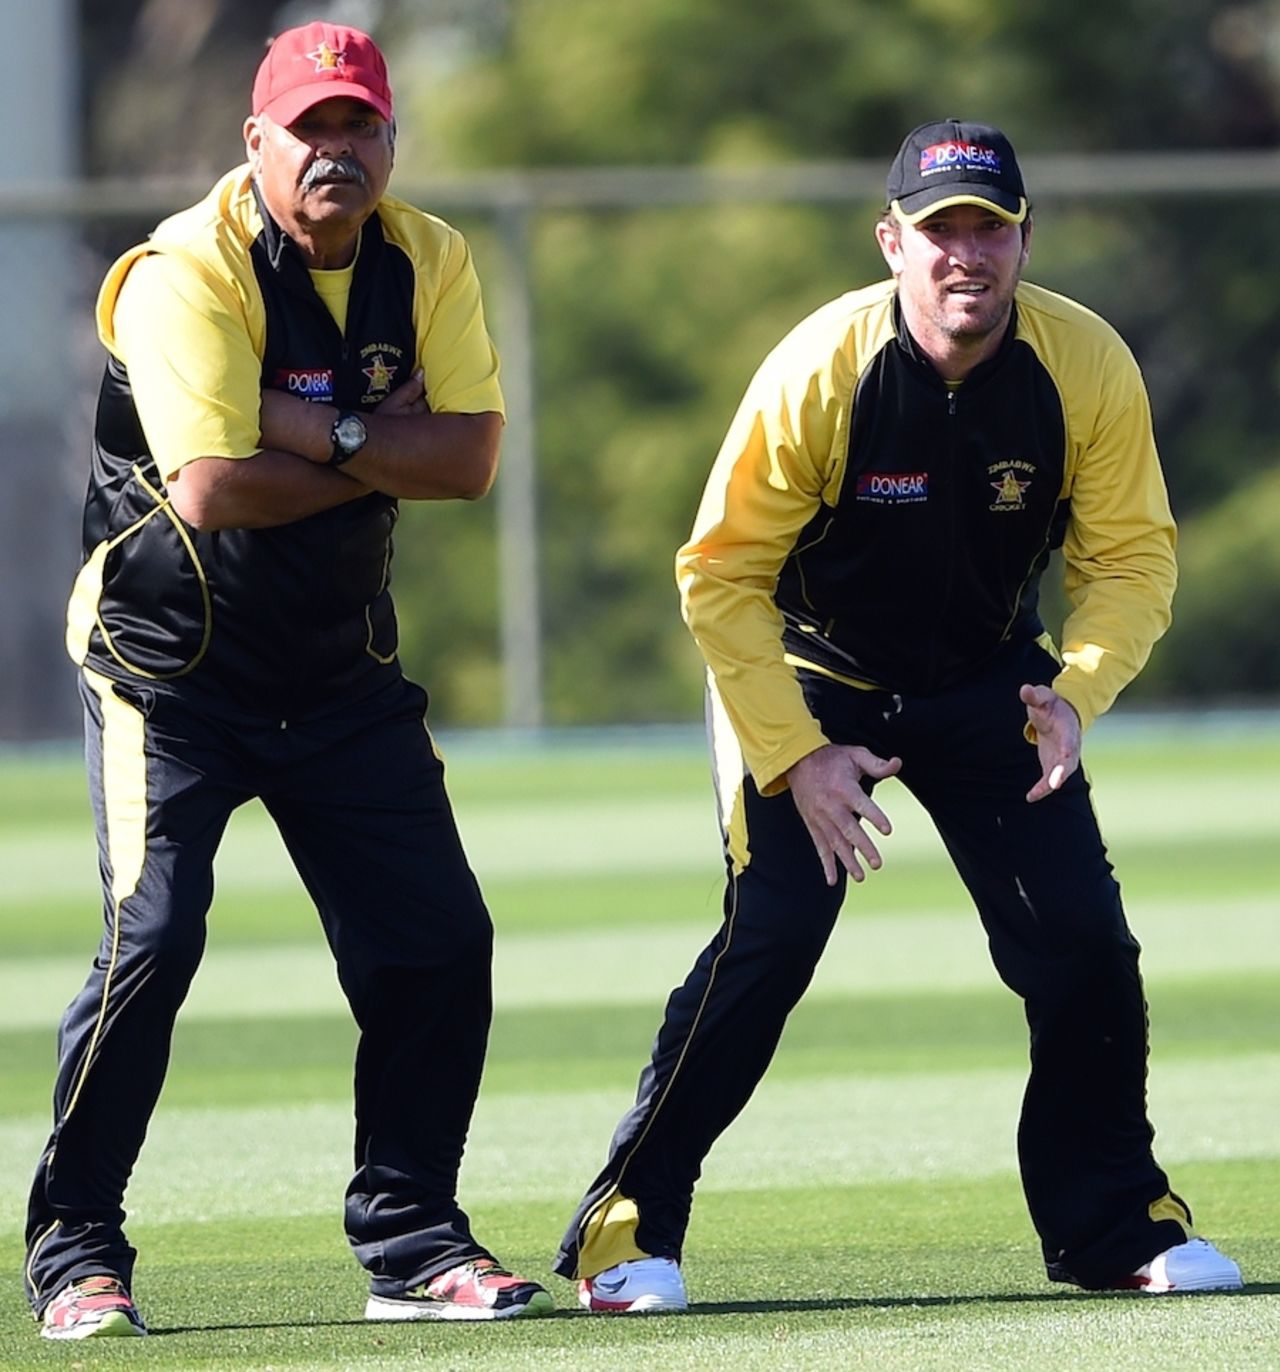 Dav Whatmore and Brendan Taylor react during a training session, World Cup 2015, Canberra, March 4, 2015